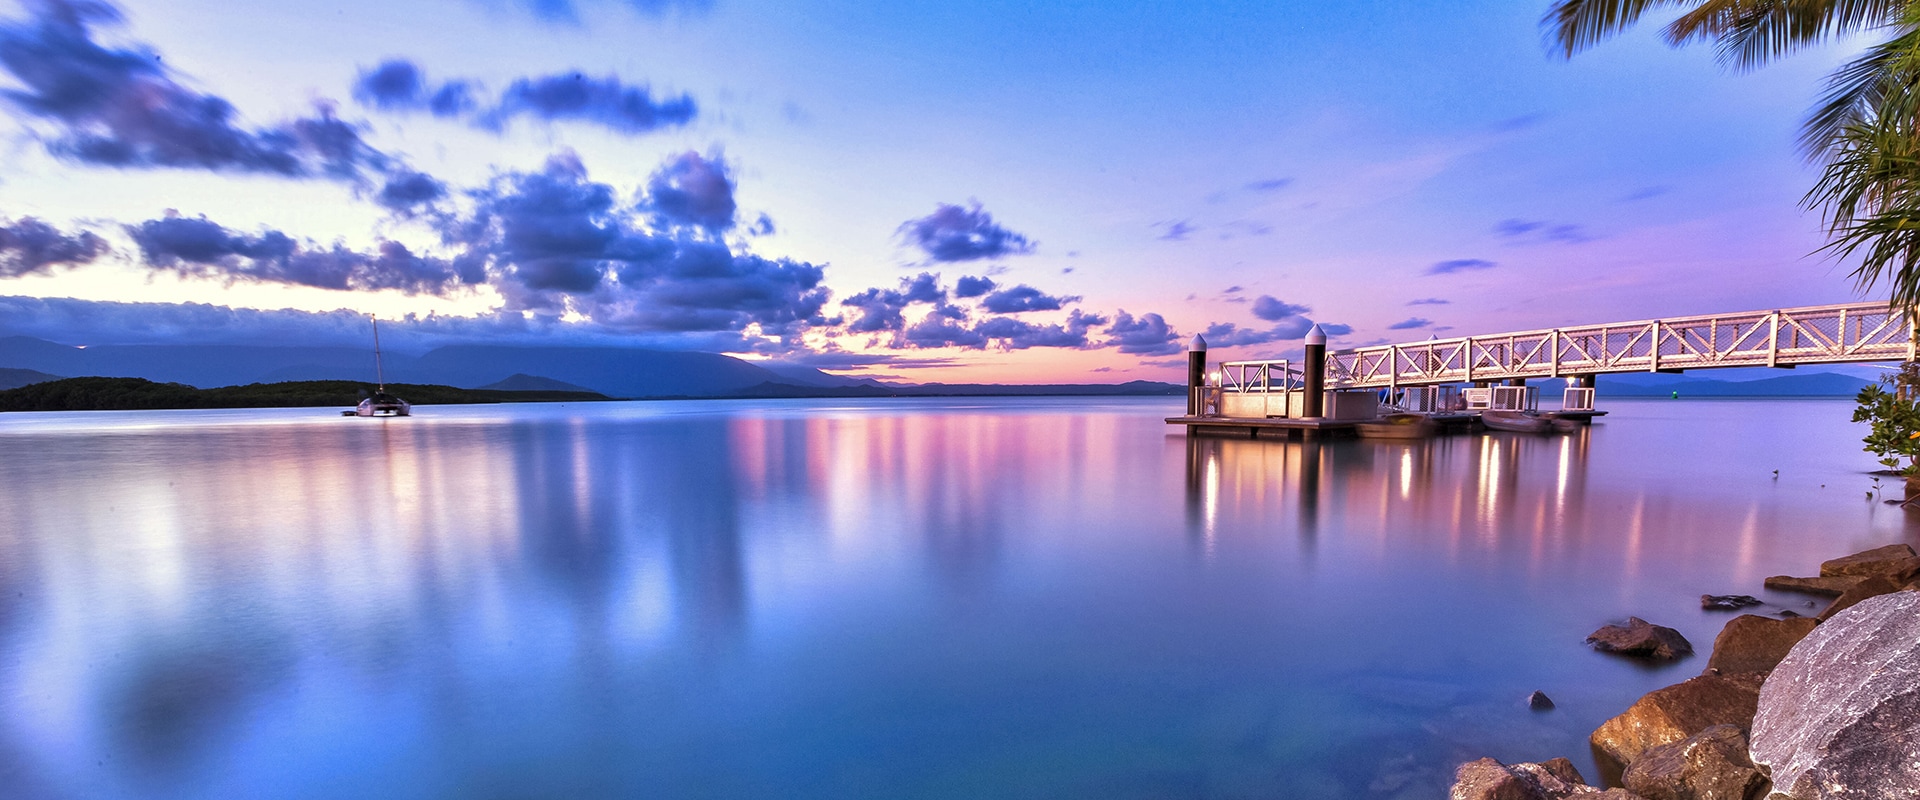 View across the water at twilight, Port Douglas, QLD